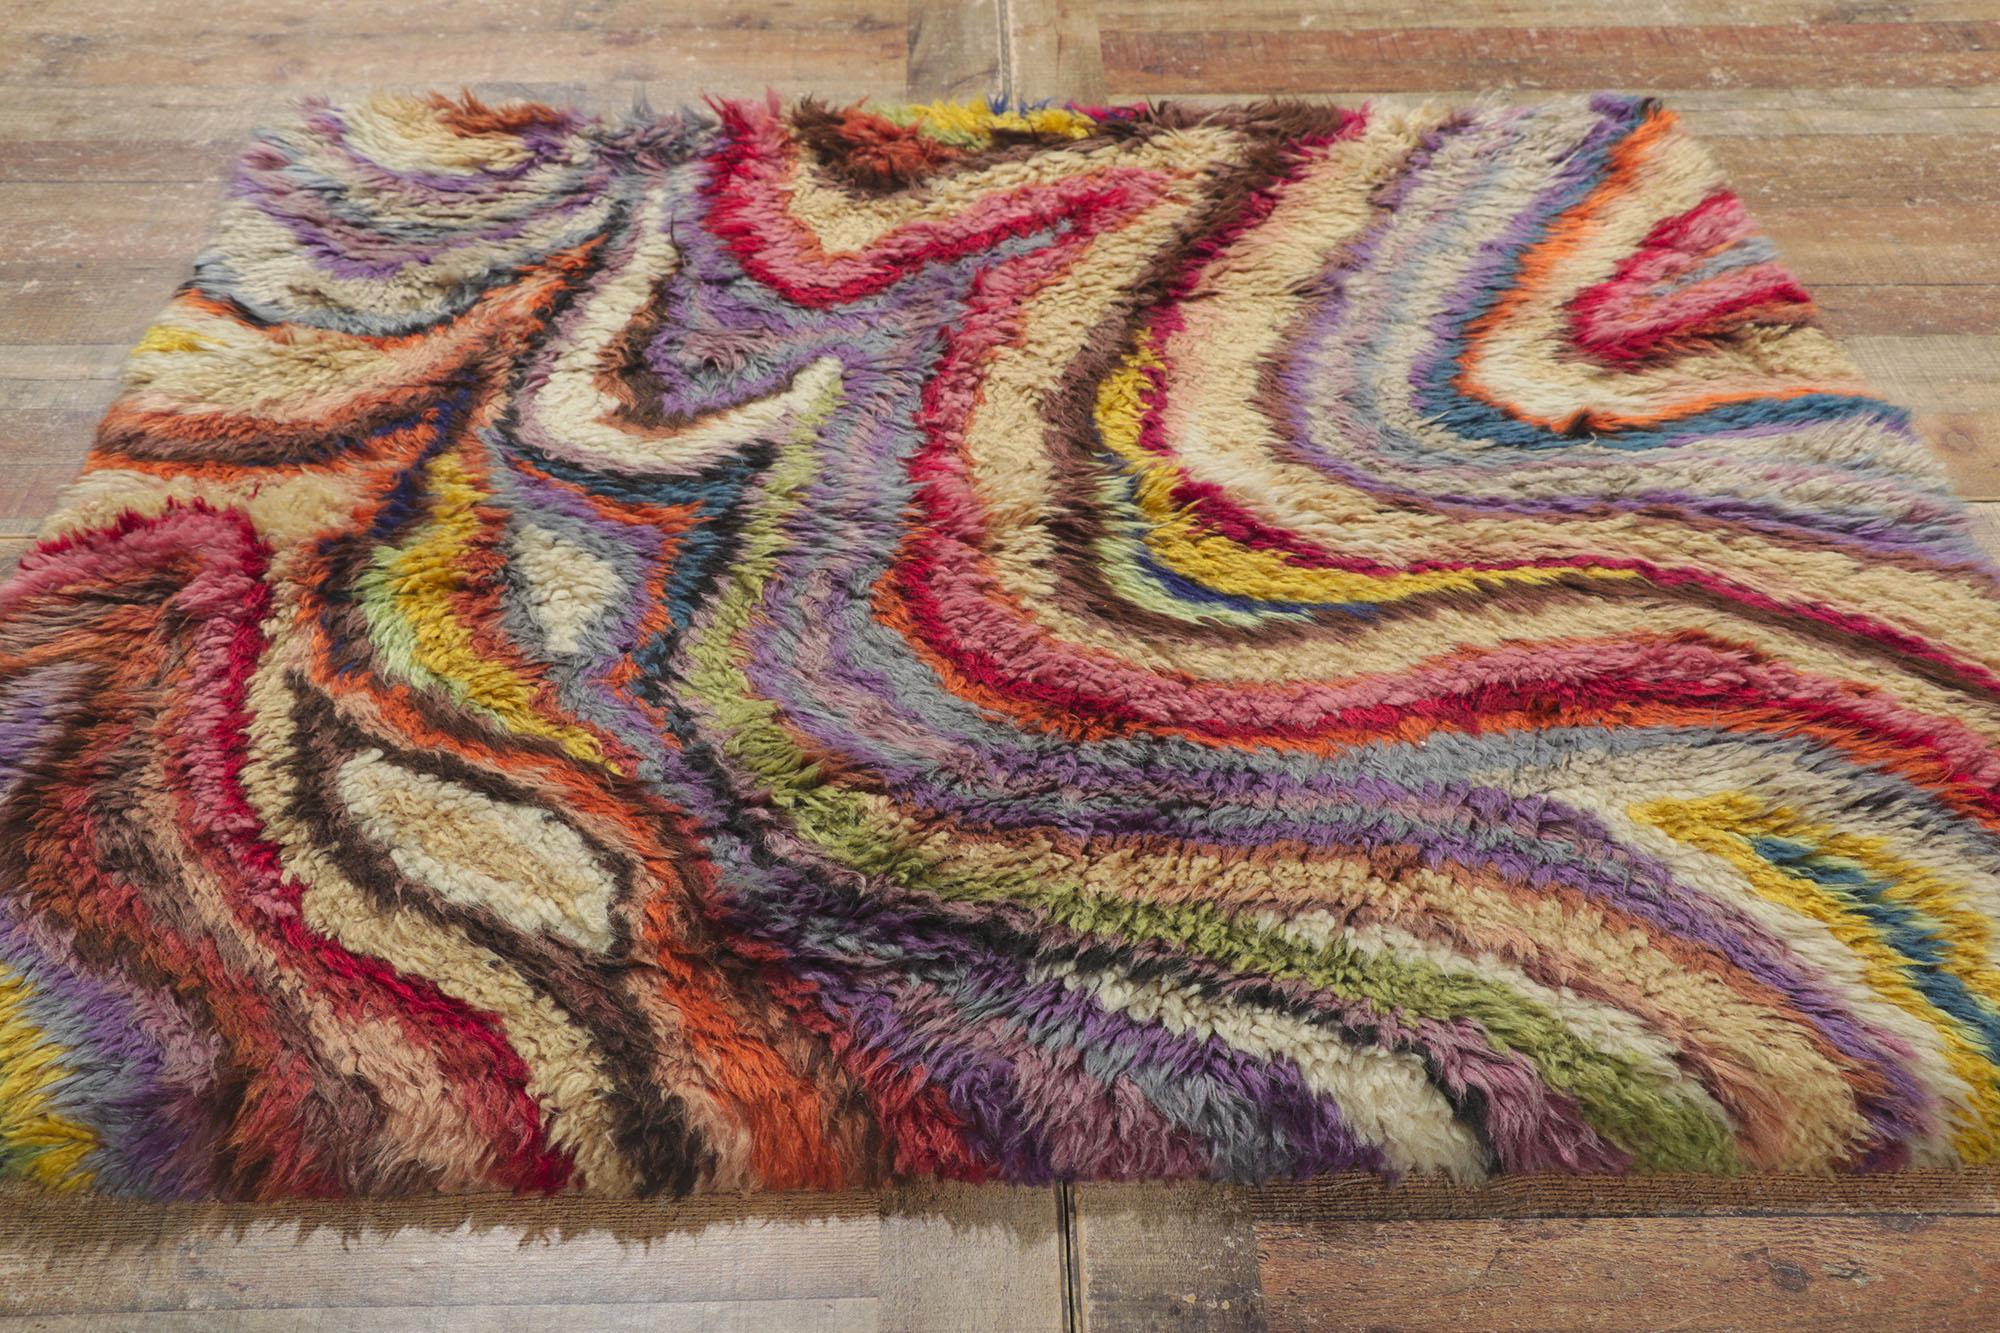 Vintage Swedish Rya Swirl Rug with Abstract Expressionist Style In Good Condition For Sale In Dallas, TX